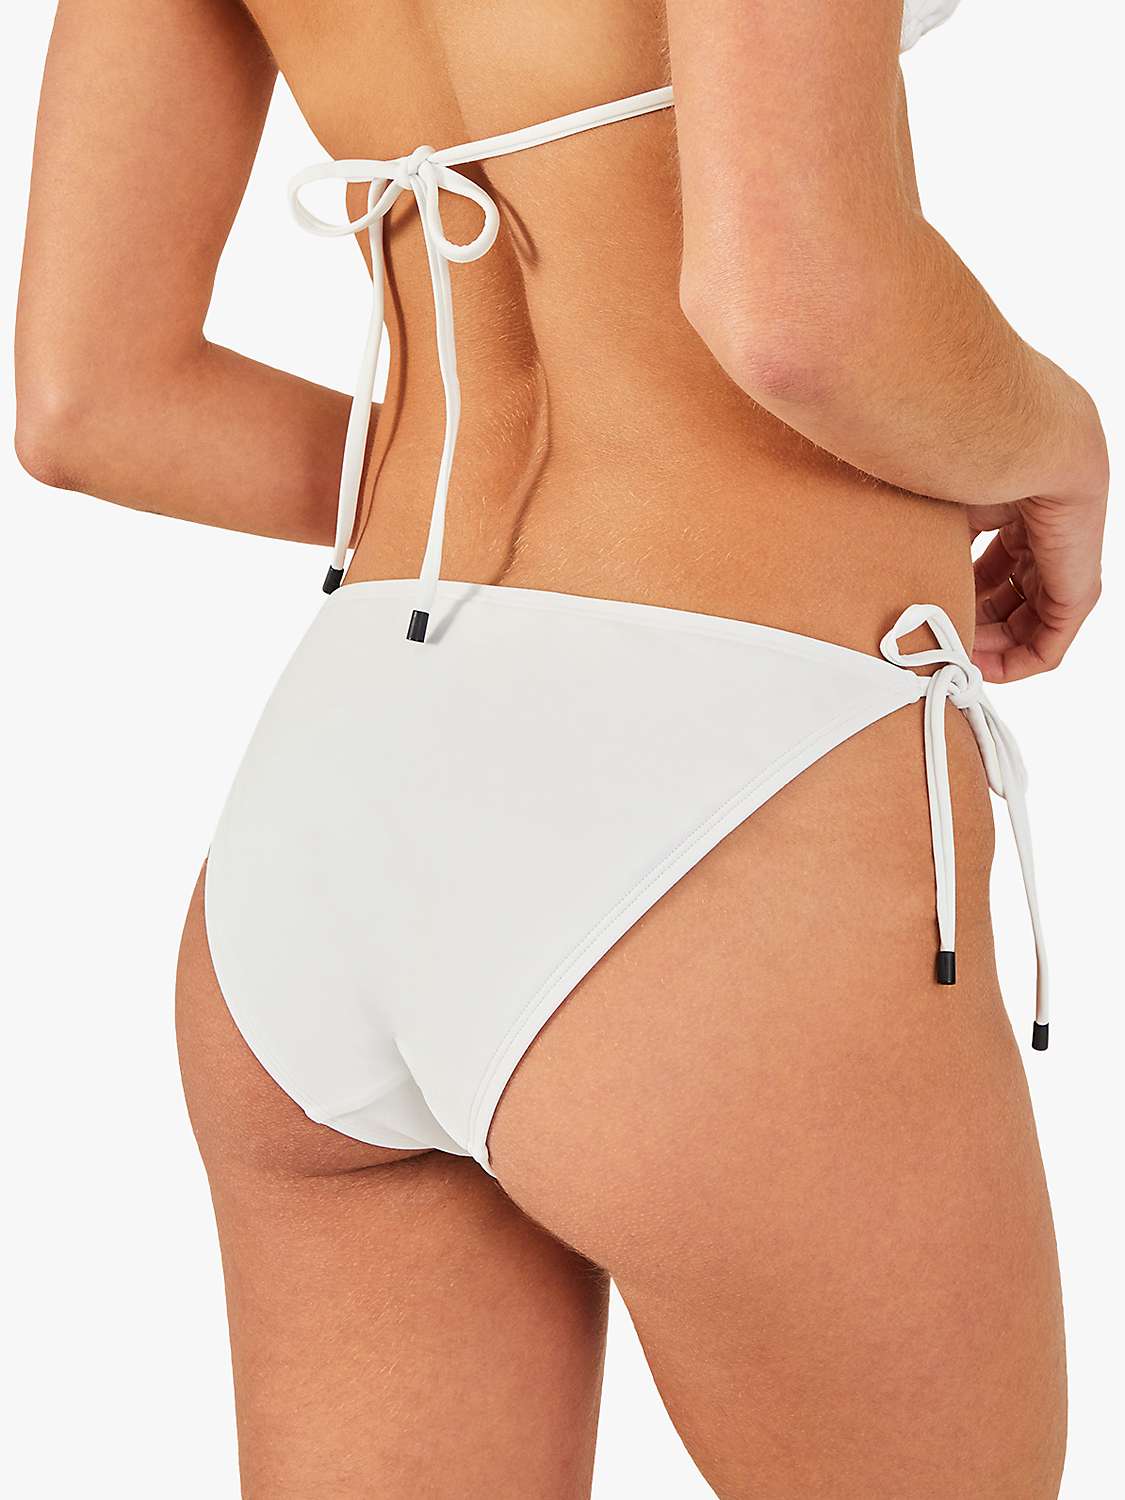 Buy Accessorize Embroidered Fan Tie Side Bikini Bottoms, White Online at johnlewis.com